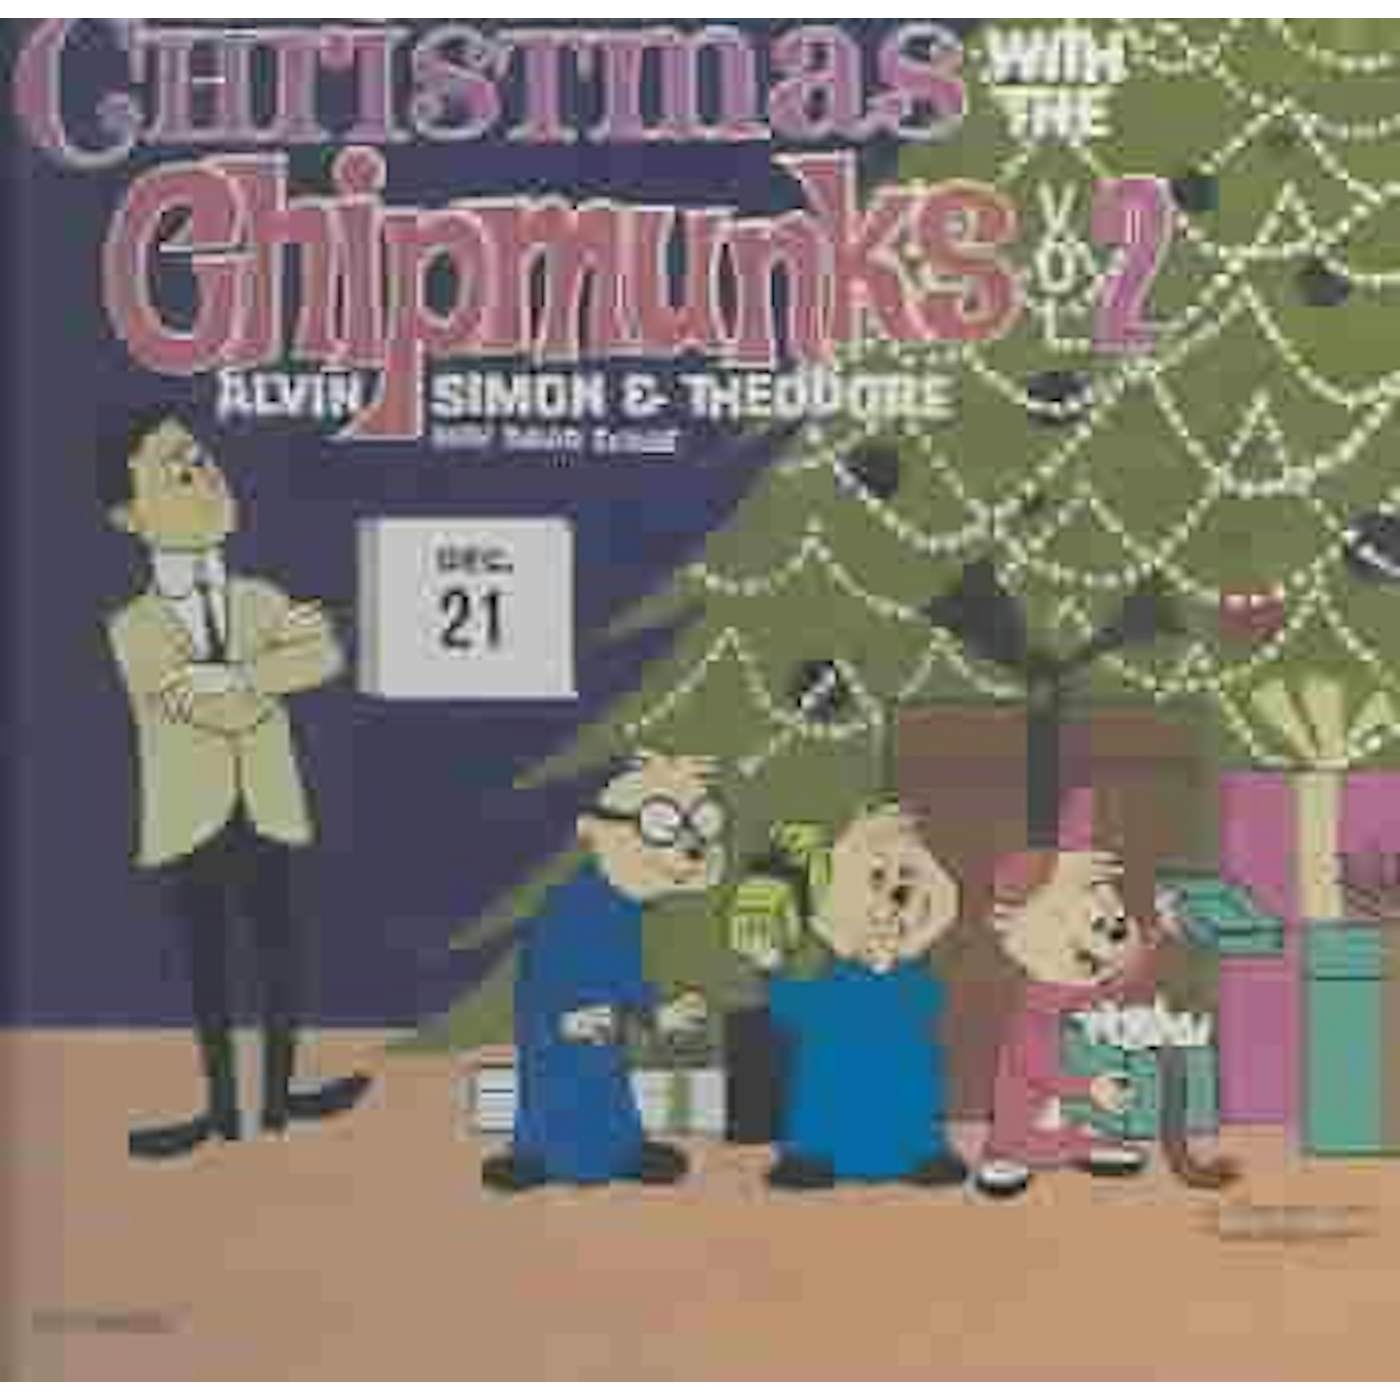 Christmas With Alvin and the Chipmunks, Vol. 2 CD